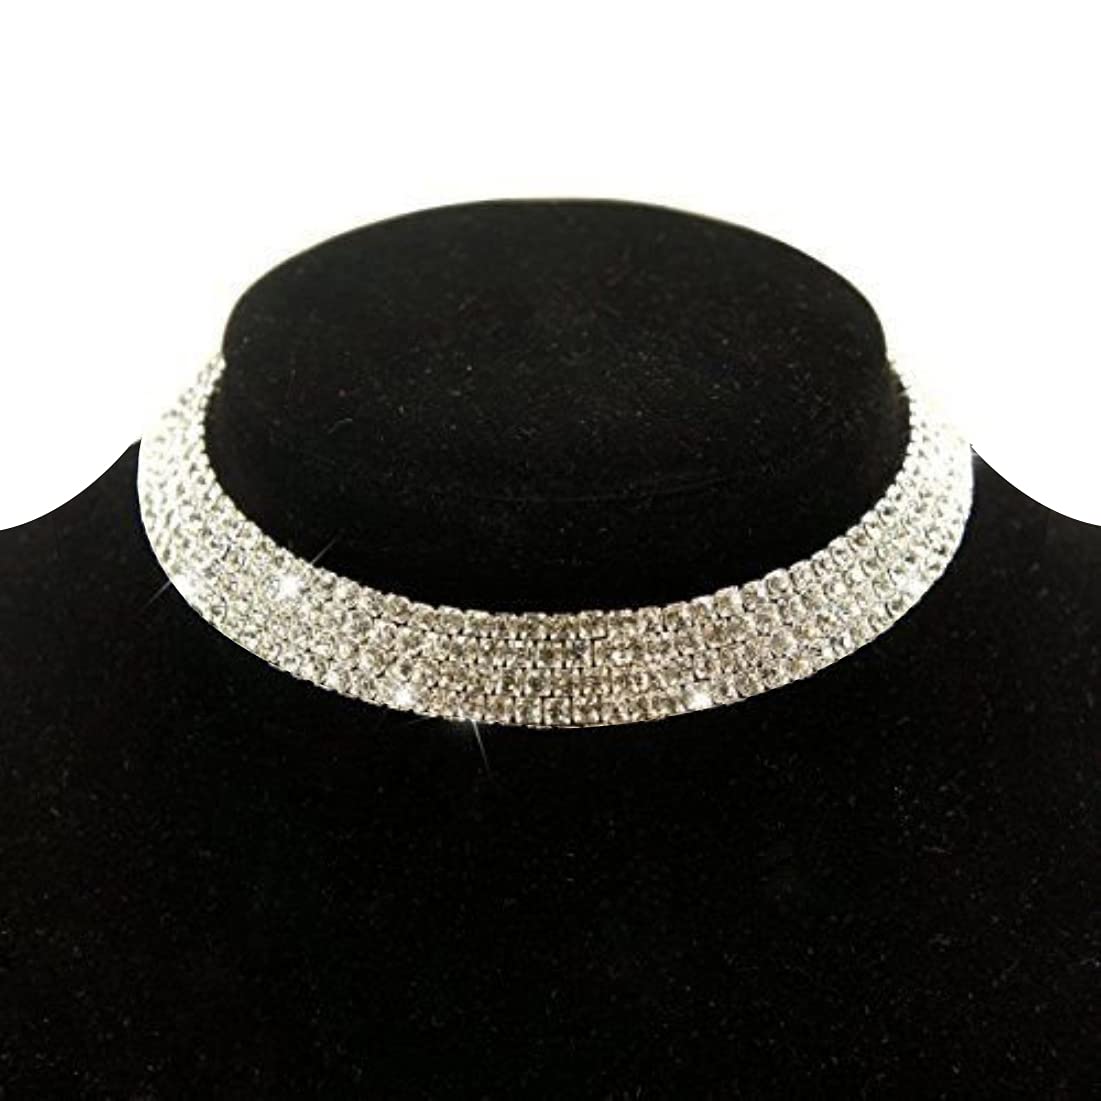 Rhinestone choker necklace.-9 stylish choker necklace to slay your accessory-by live love laugh